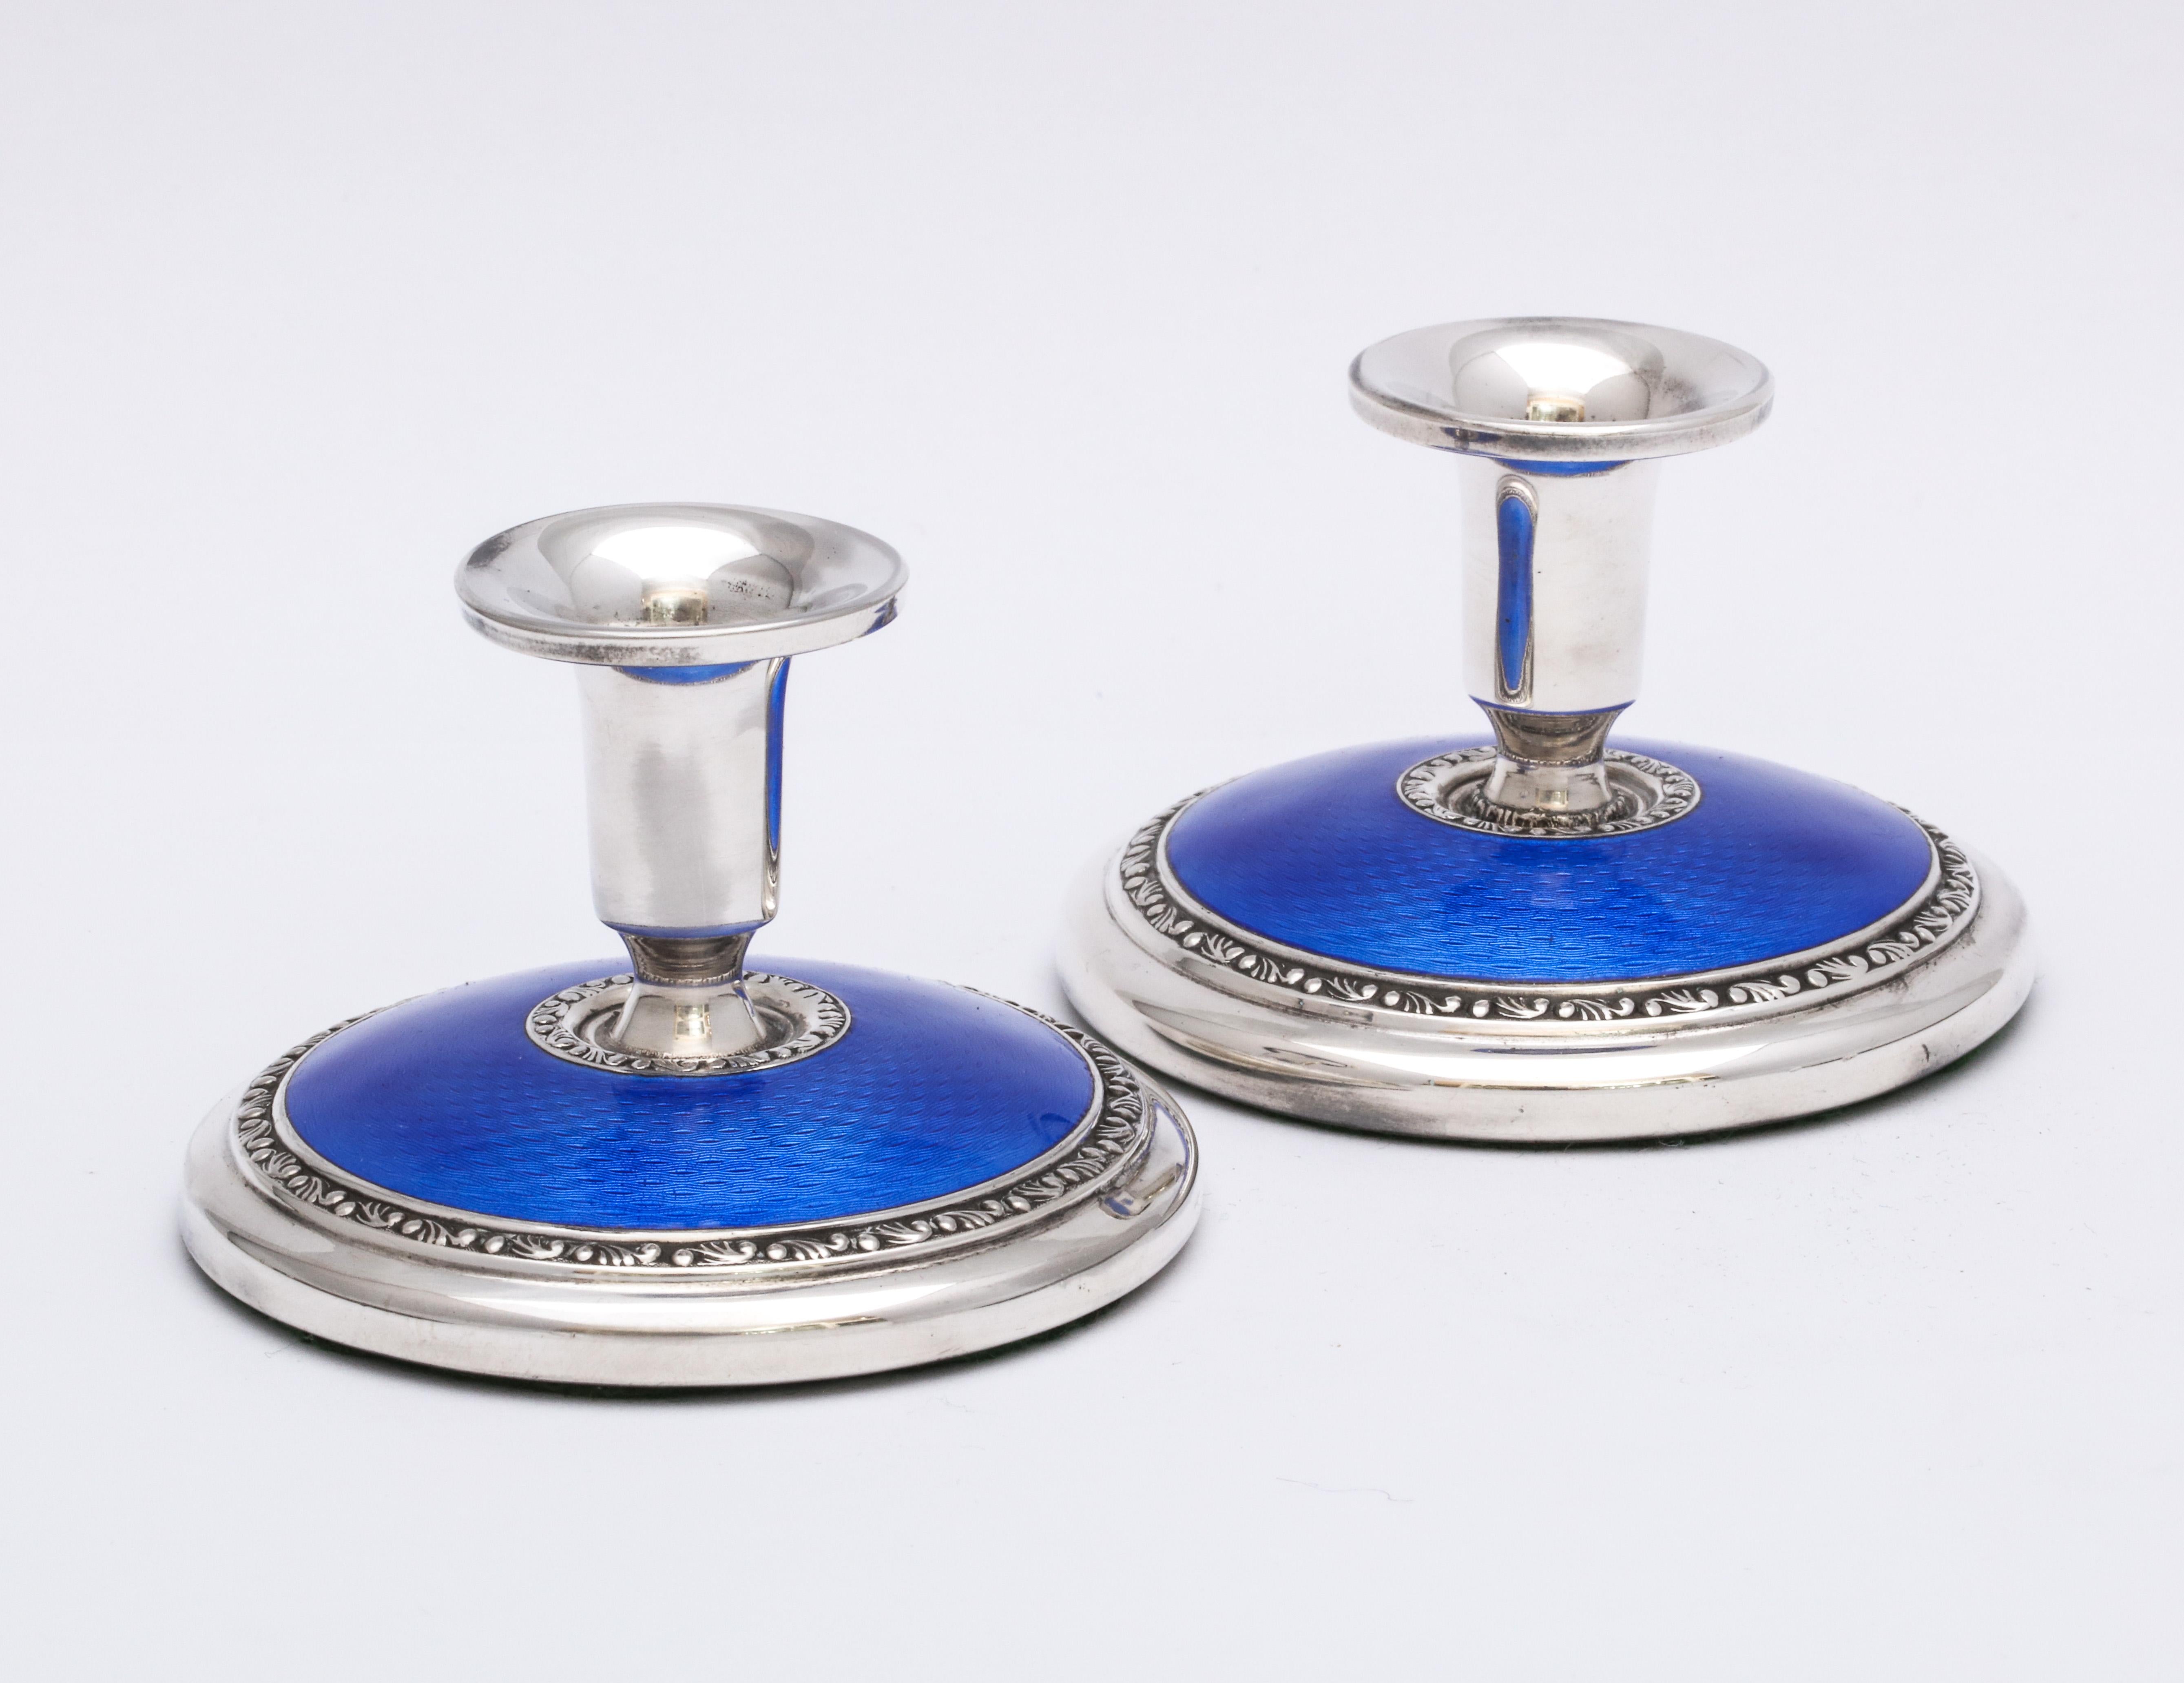 Pair of Art Deco, sterling silver and deep blue guilloche enamel candlesticks, Norway, circa 1930s, Norsk Solwaaren Industri - Makers. Each measures 2 inches high x 2 3/4 inches in diameter. Underside is covered in dark green felt. Weighted. Dark